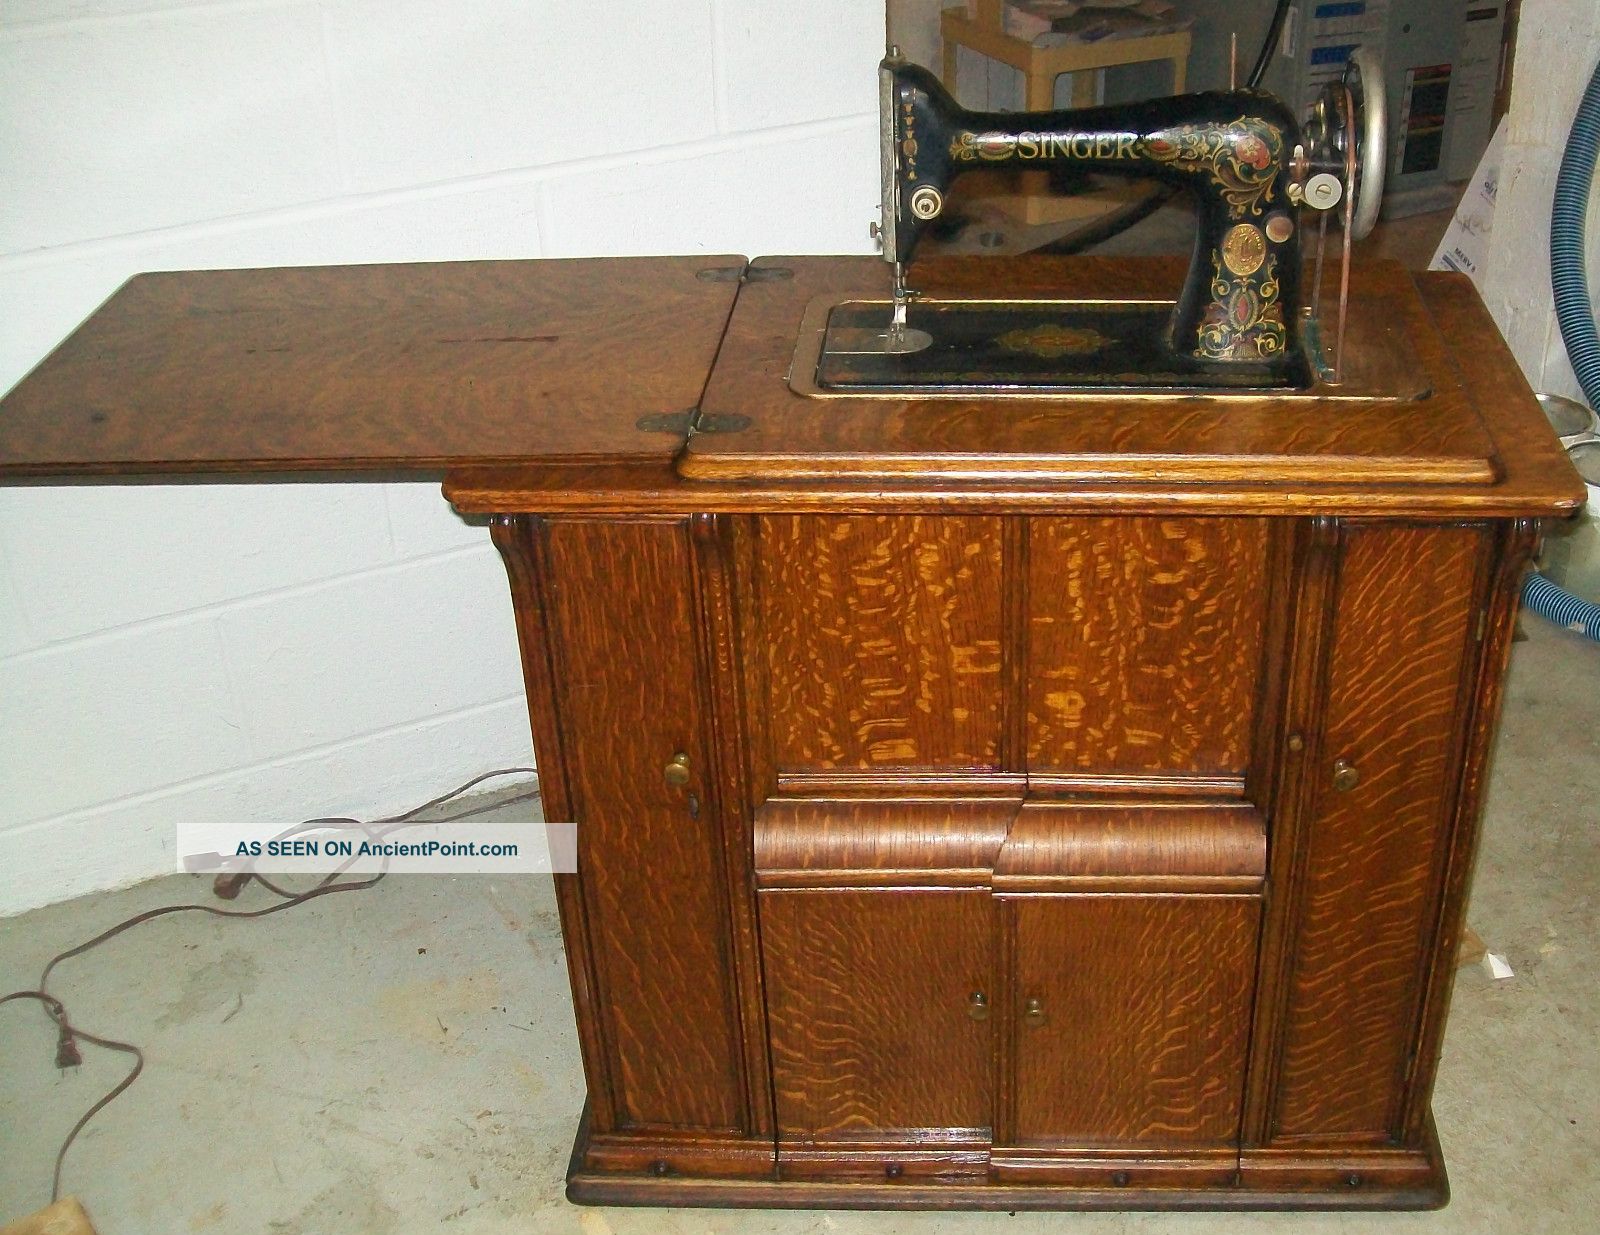 1920 Singer Sewing Machine And Parlor Cabinet Model 66 Antique